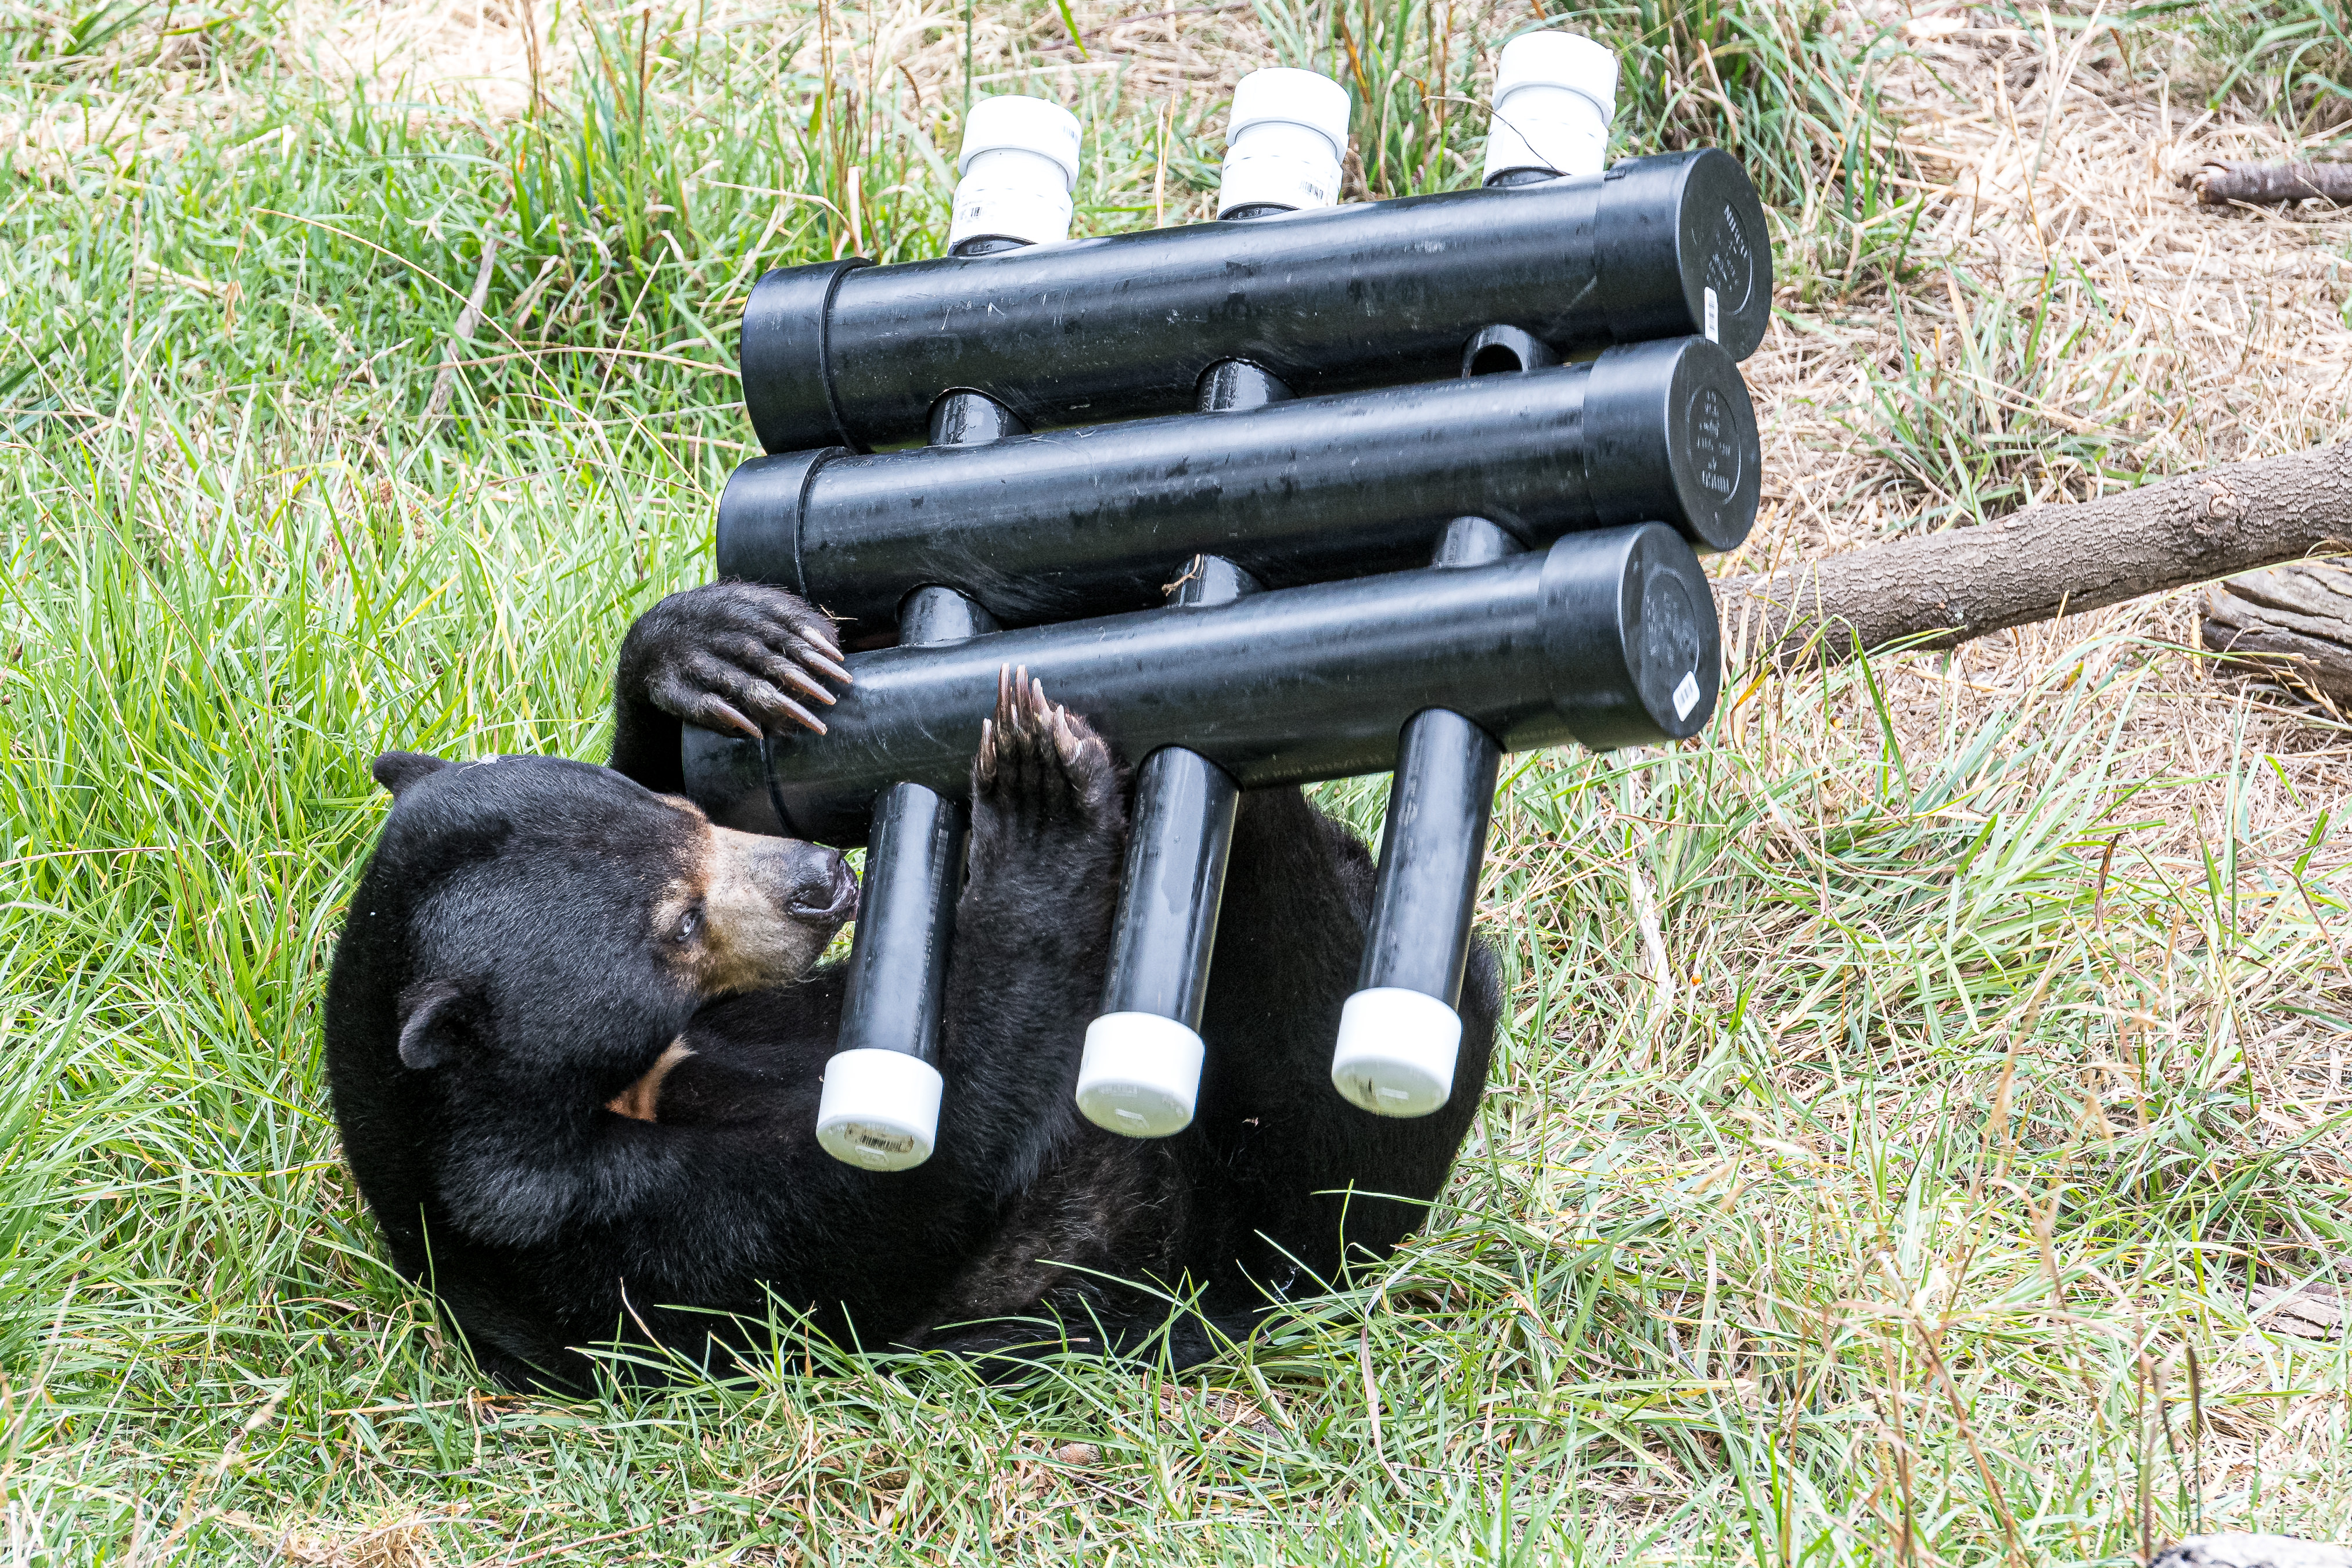 Sun bear interacts with PVC level 3 enrichment device